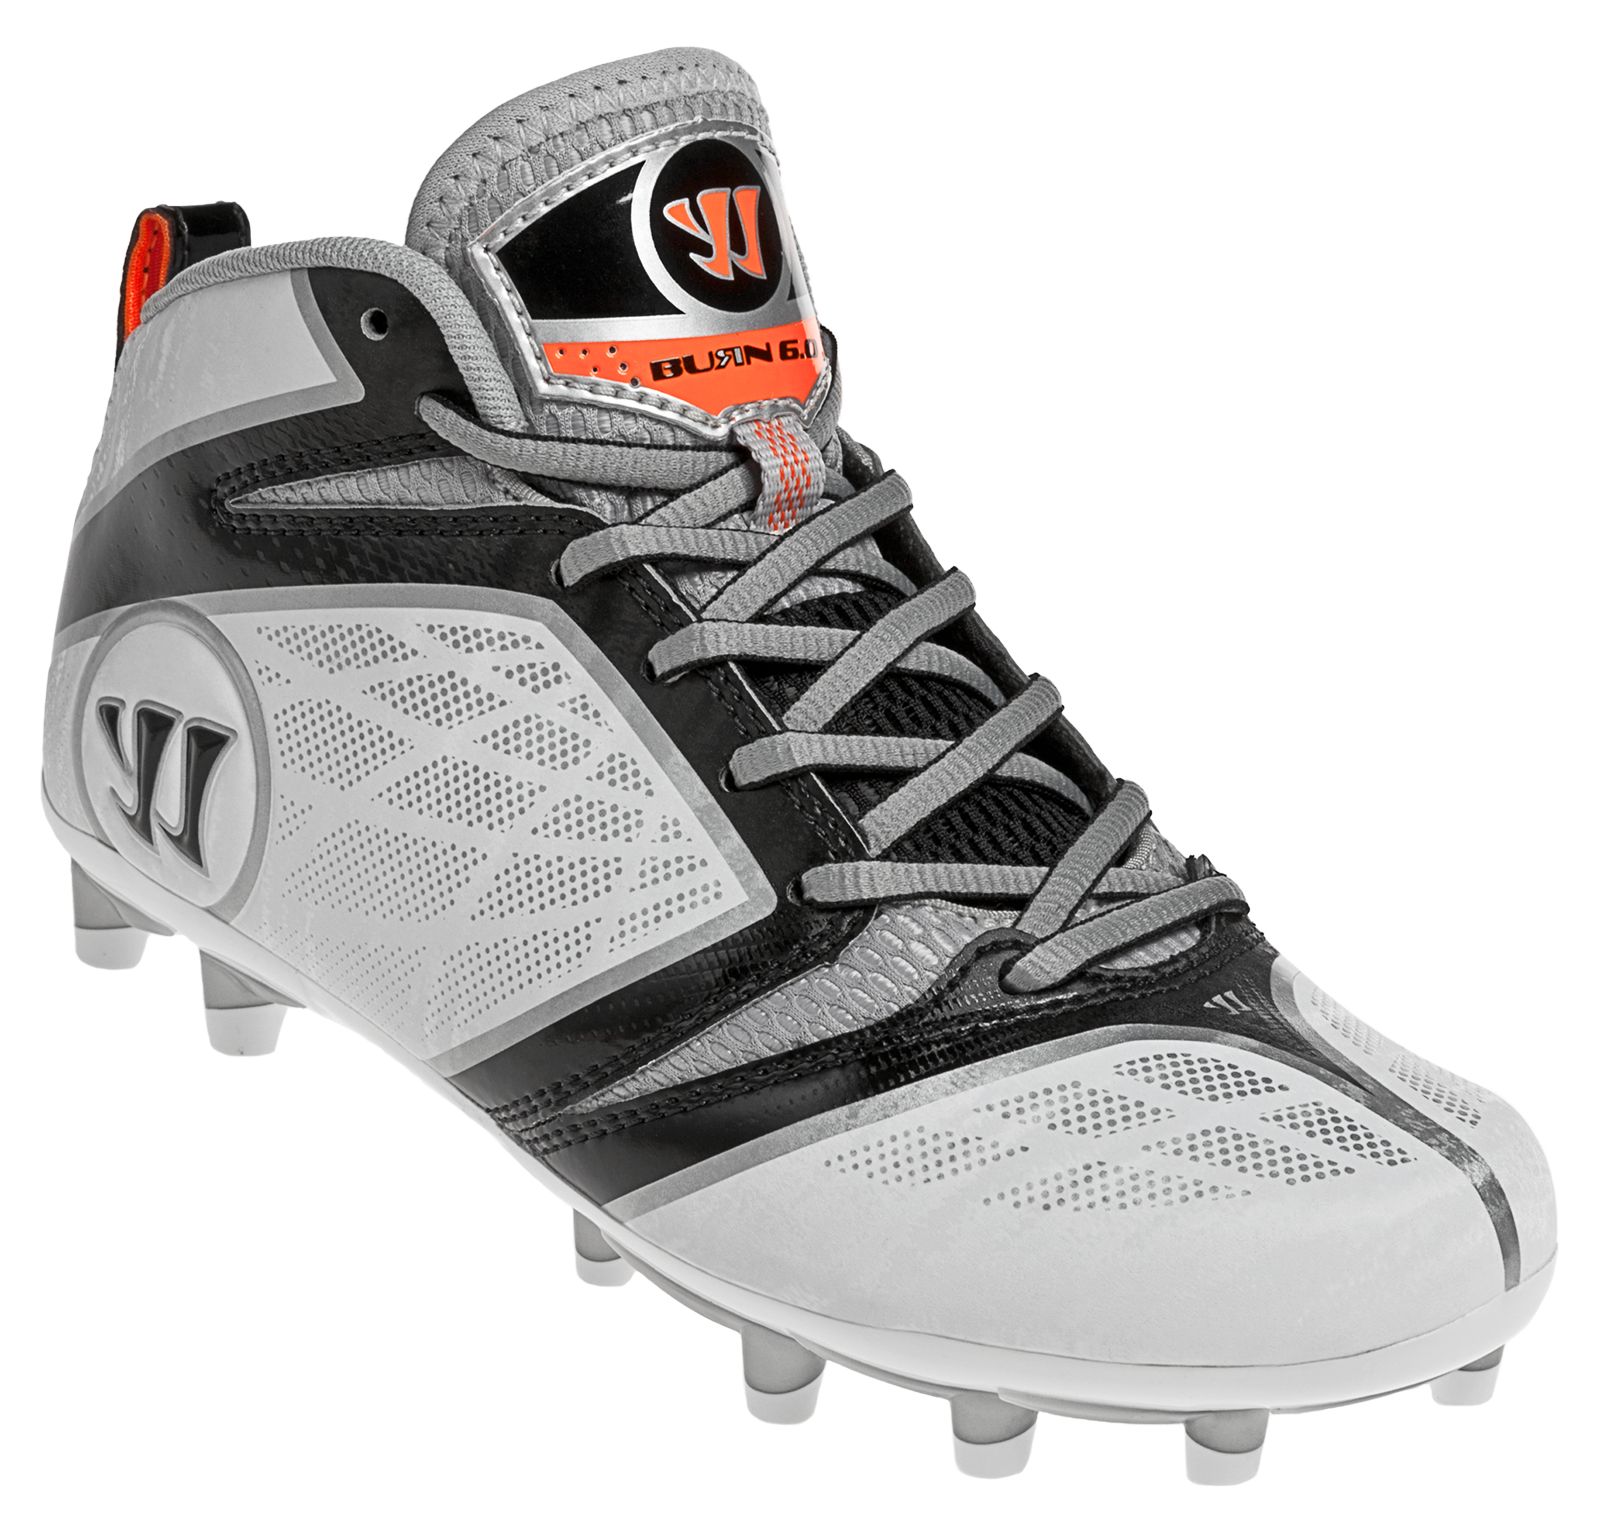 Youth Burn Speed 6.0 Jr. Cleat, White with Black image number 6